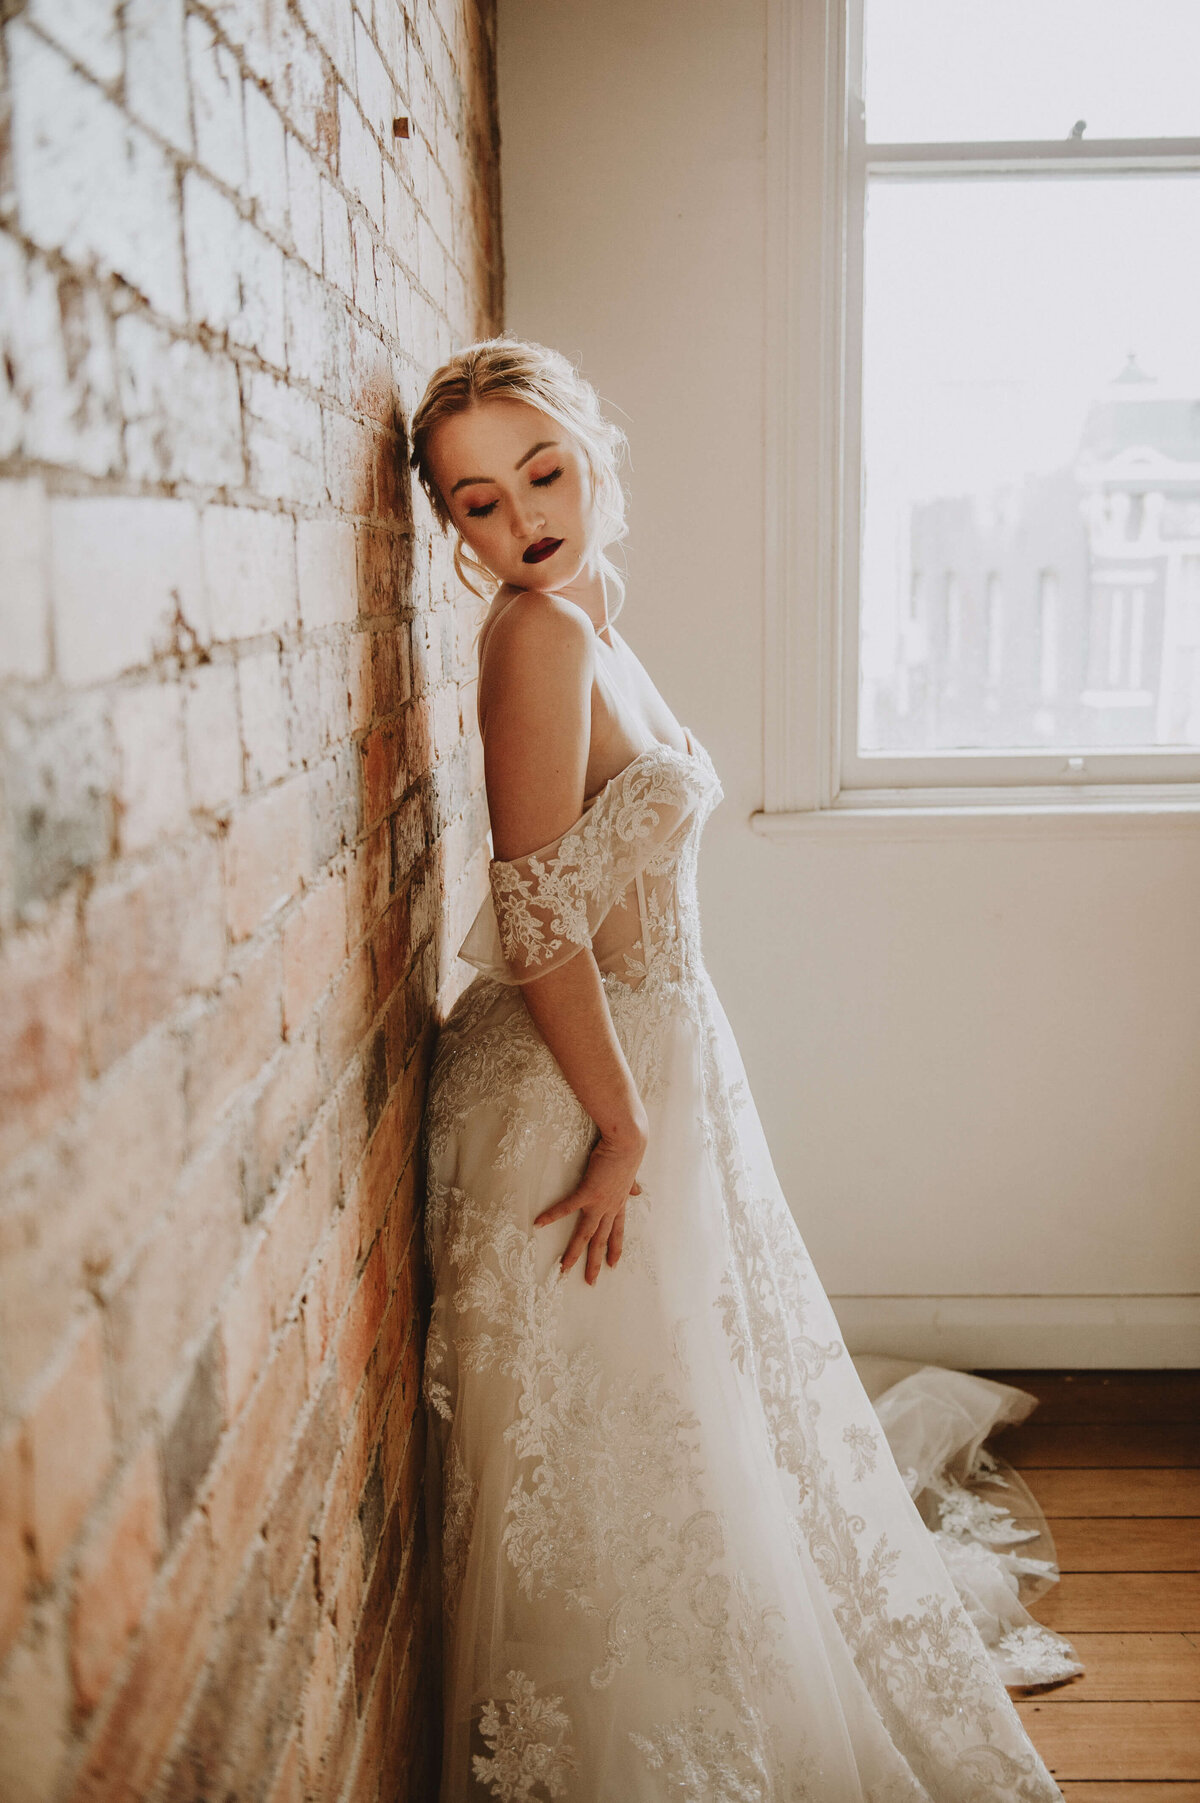 Gretta by Jacqueline May Bride_2